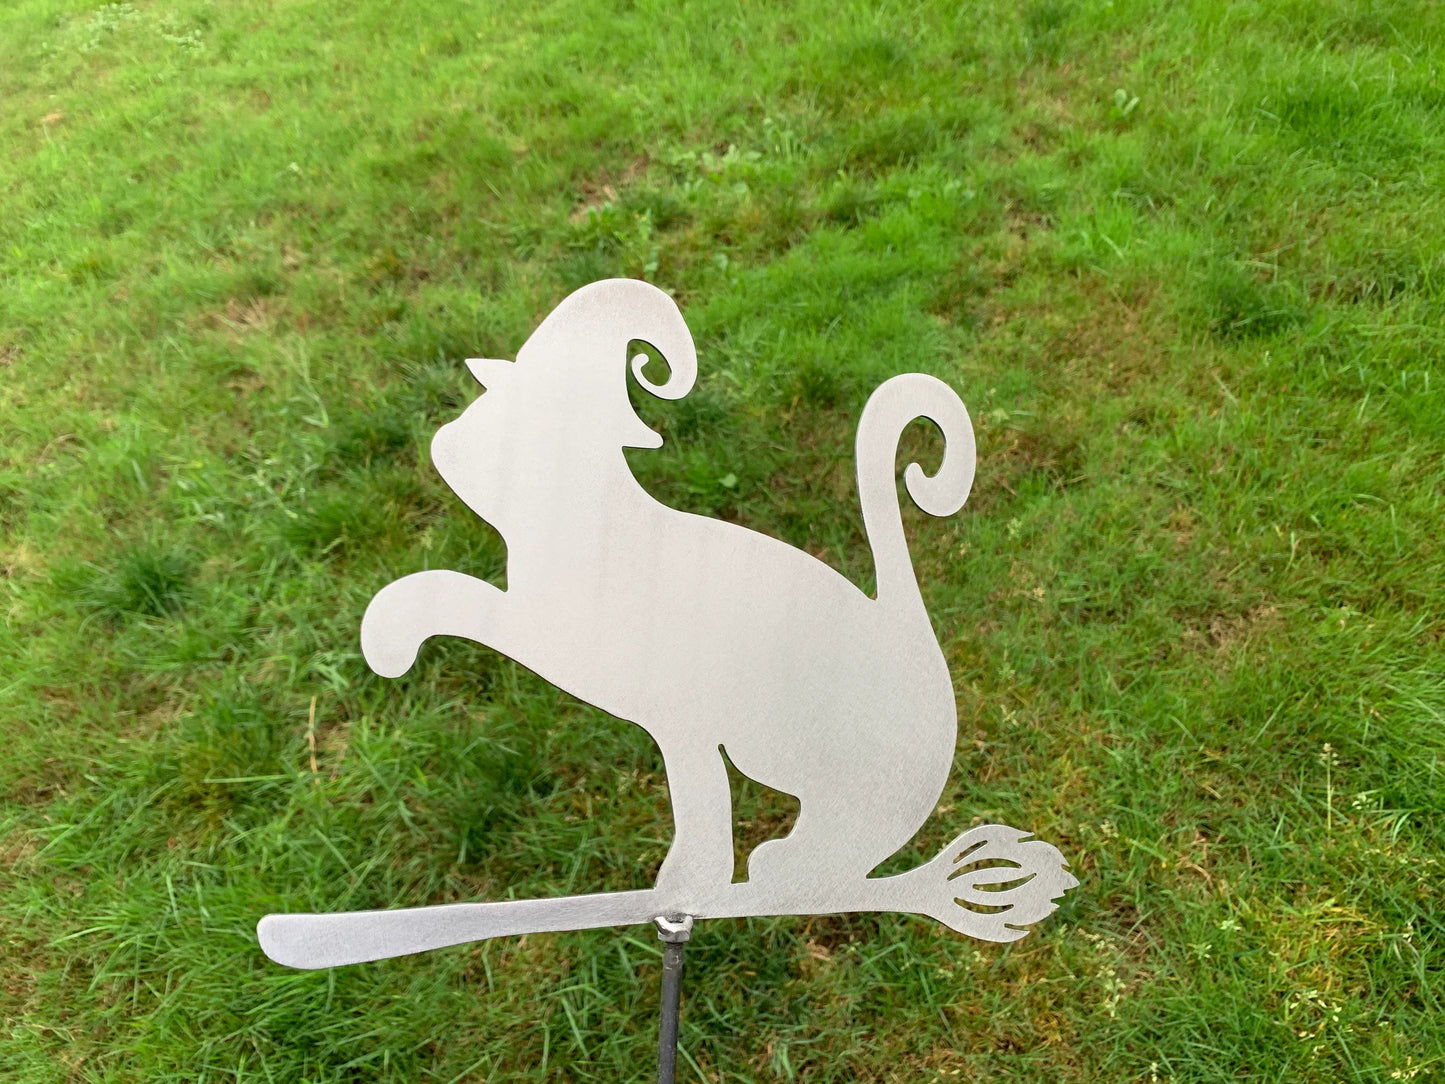 Metal Halloween Art Cat with witch hat flying on broom Stake Decoration , Garden Art, Yard Art, Hand Made, Fall Decor, Outdoor Garden Decor, Post Mount Bracket, Wall Mount w/(Holes)